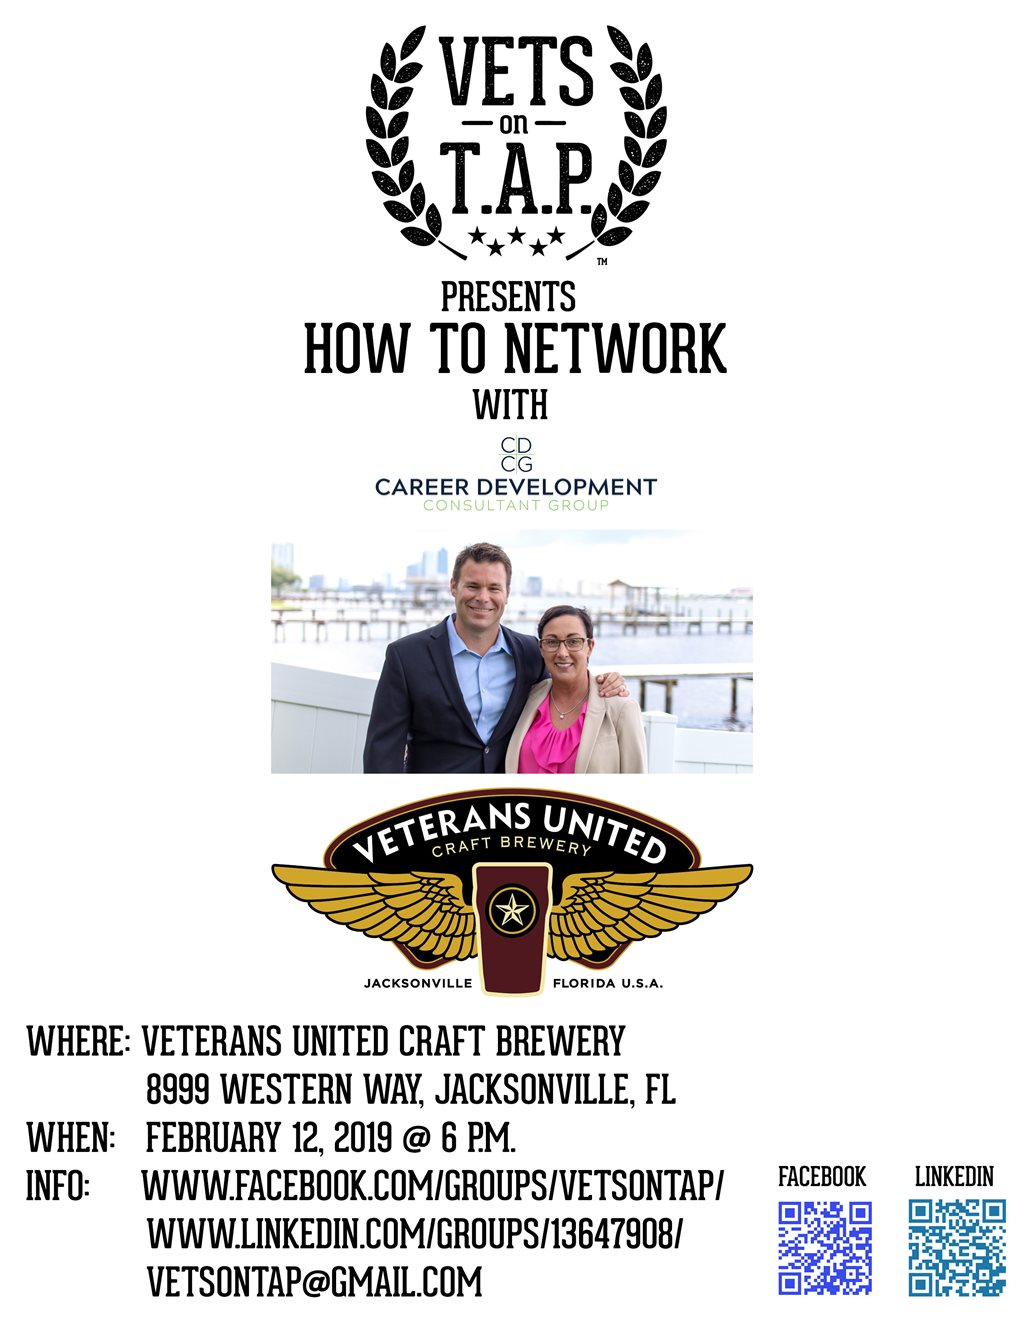 Vets on TAP presents 